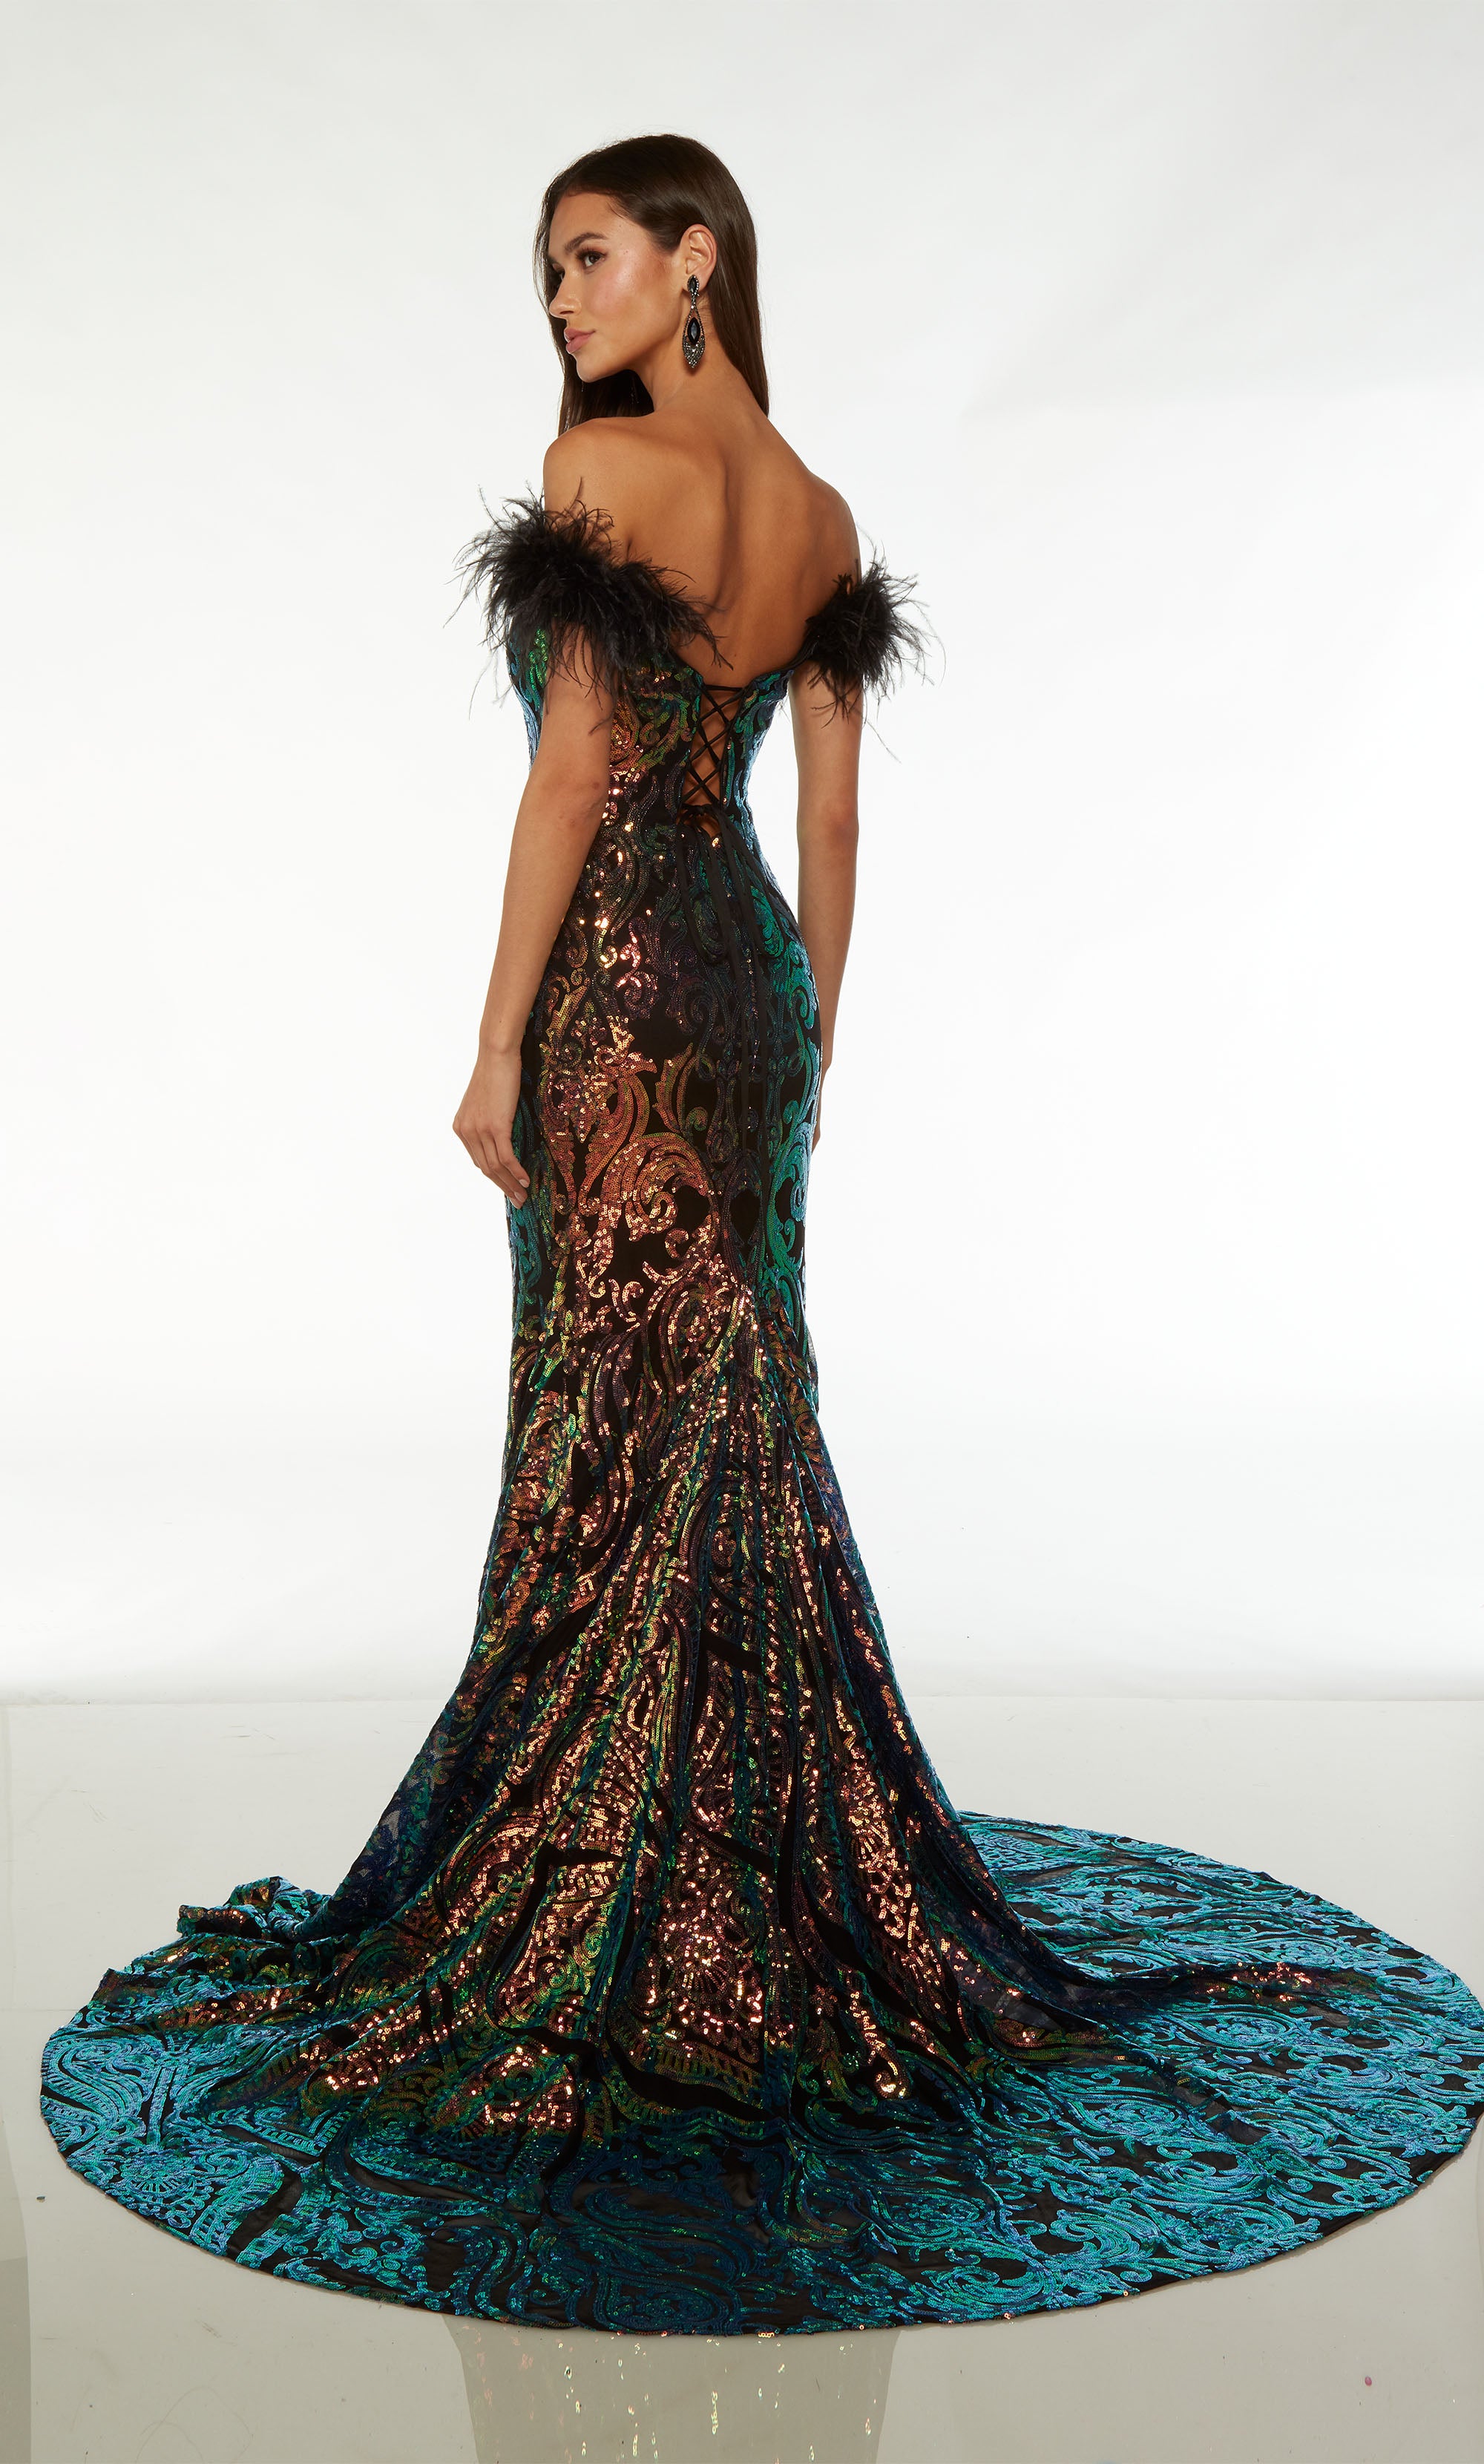 Elegant mermaid gown: off-shoulder, feather sleeves, fitted bodice, lace-up back, long train, paisley-patterned iridescent sequins.